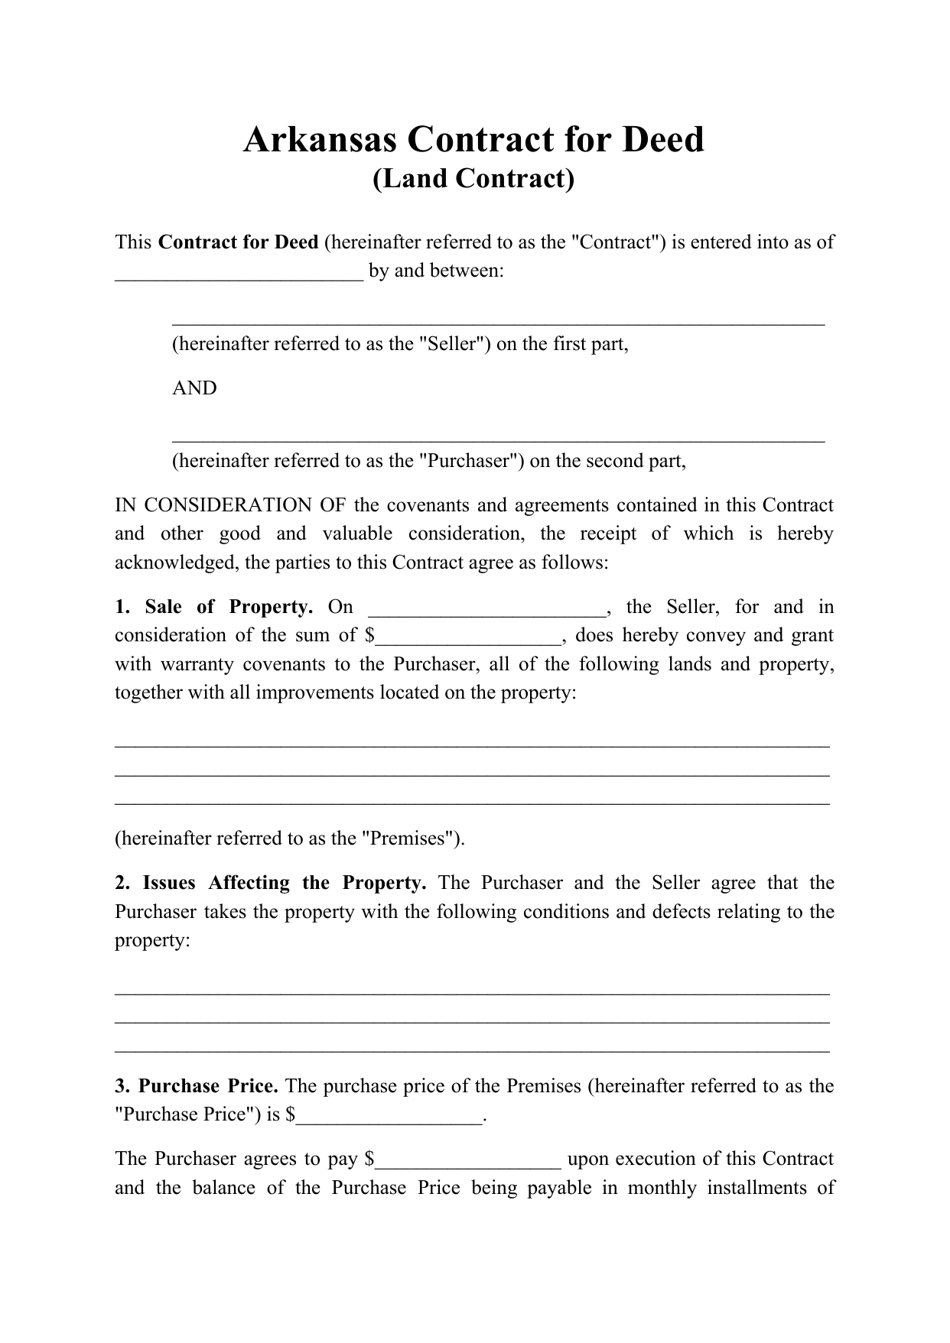 Contract for Deed (Land Contract) - Arkansas, Page 1